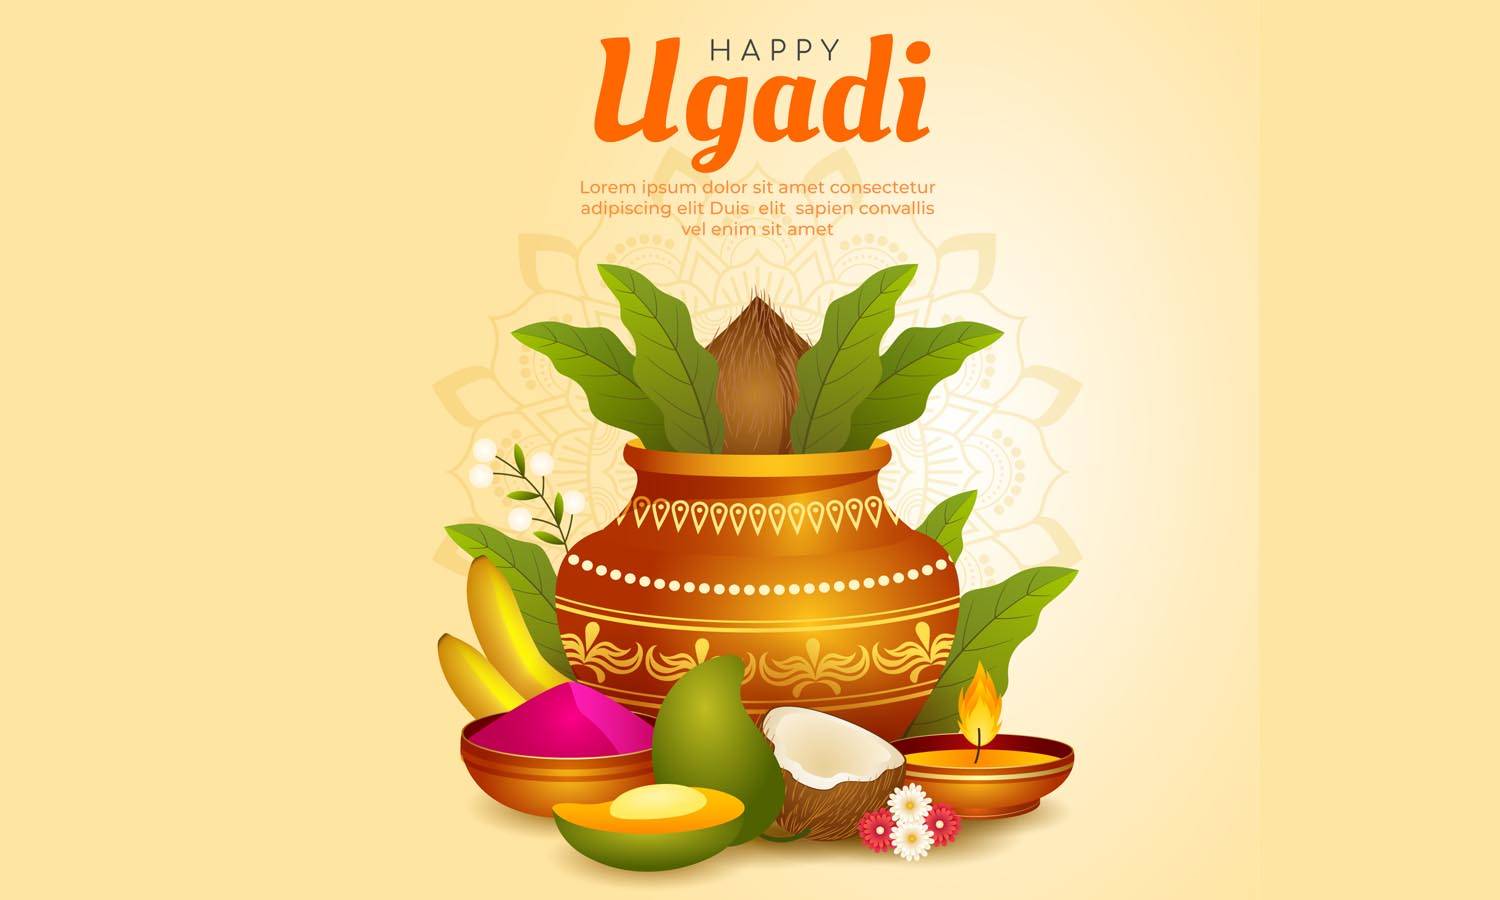 Ugadi wishes images for WhatsApp Status and Facebook messages.